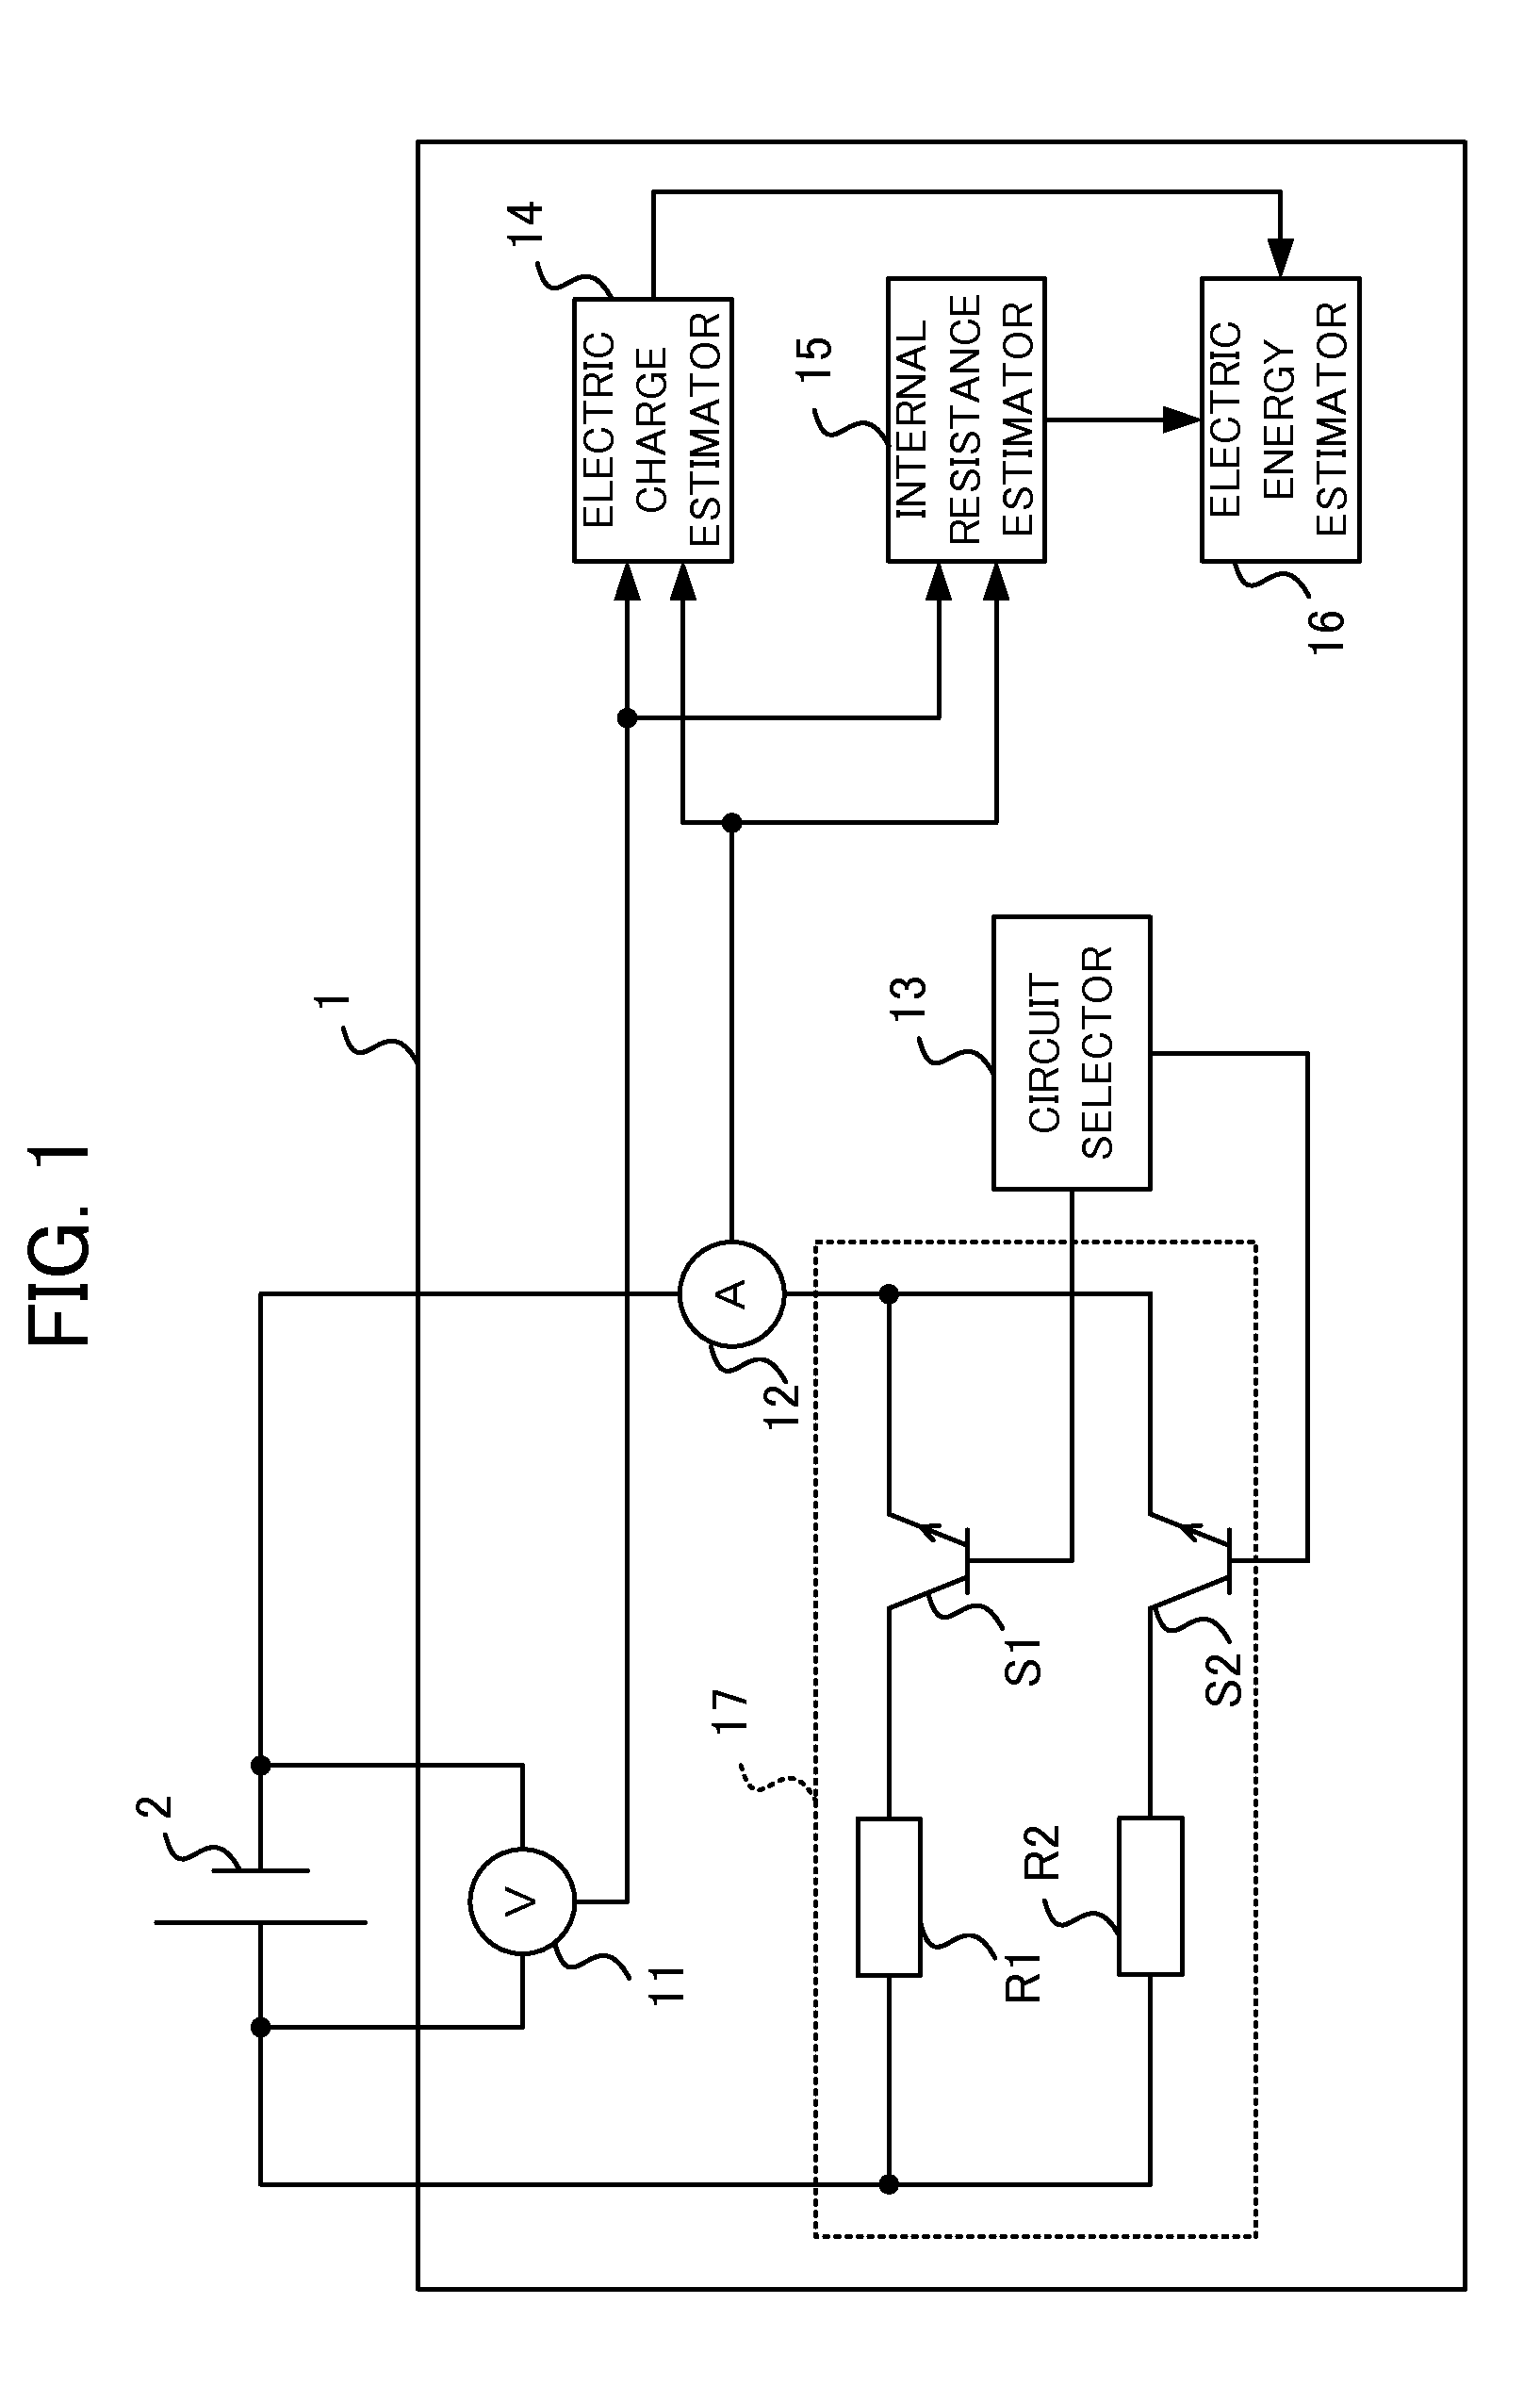 Apparatus and method for estimating power storage device degradation